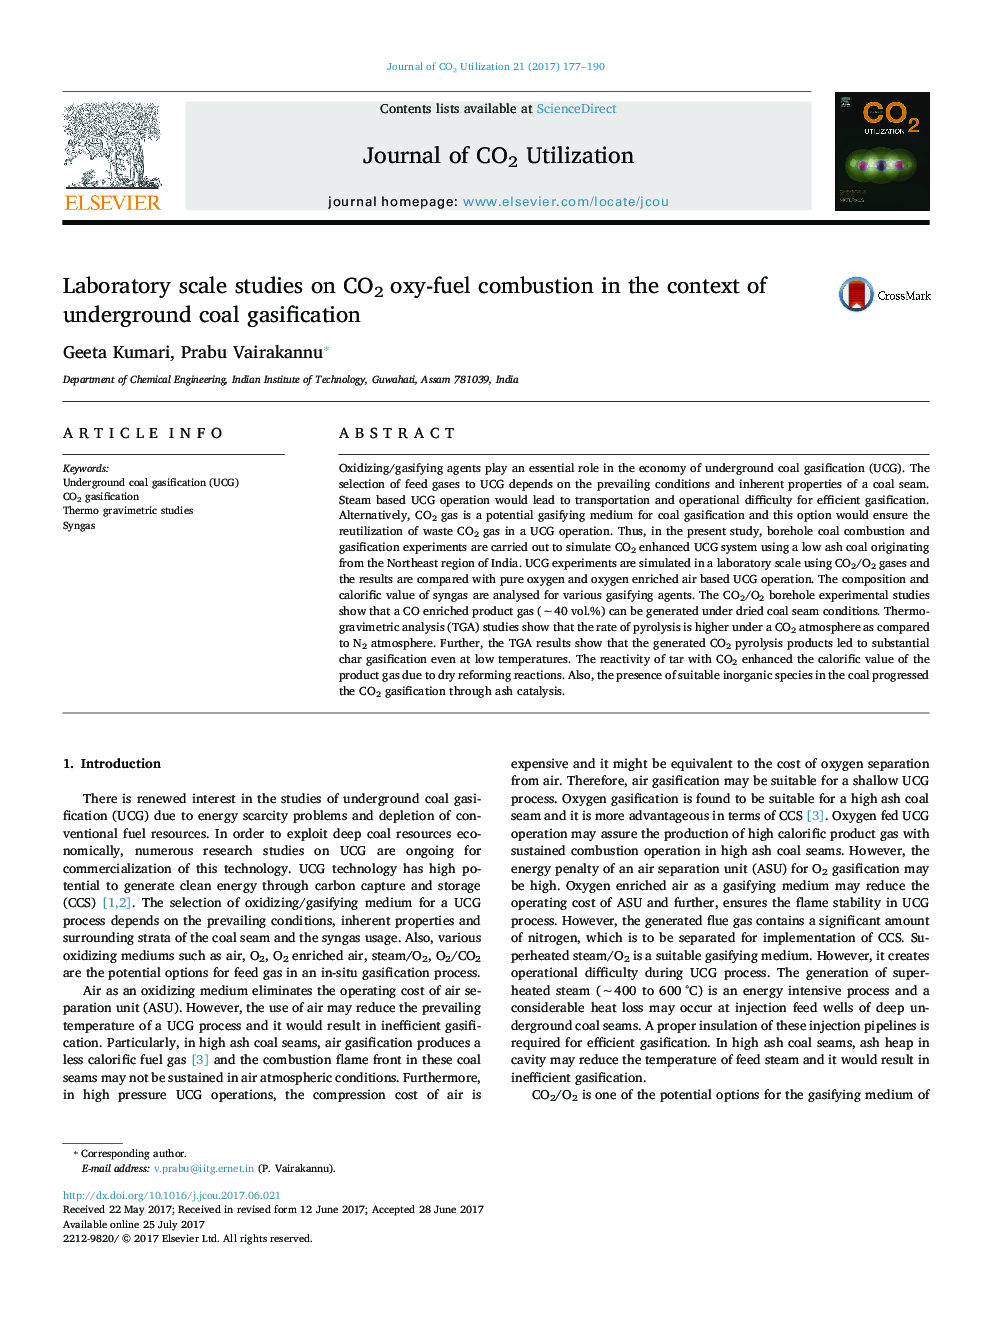 Laboratory scale studies on CO2 oxy-fuel combustion in the context of underground coal gasification